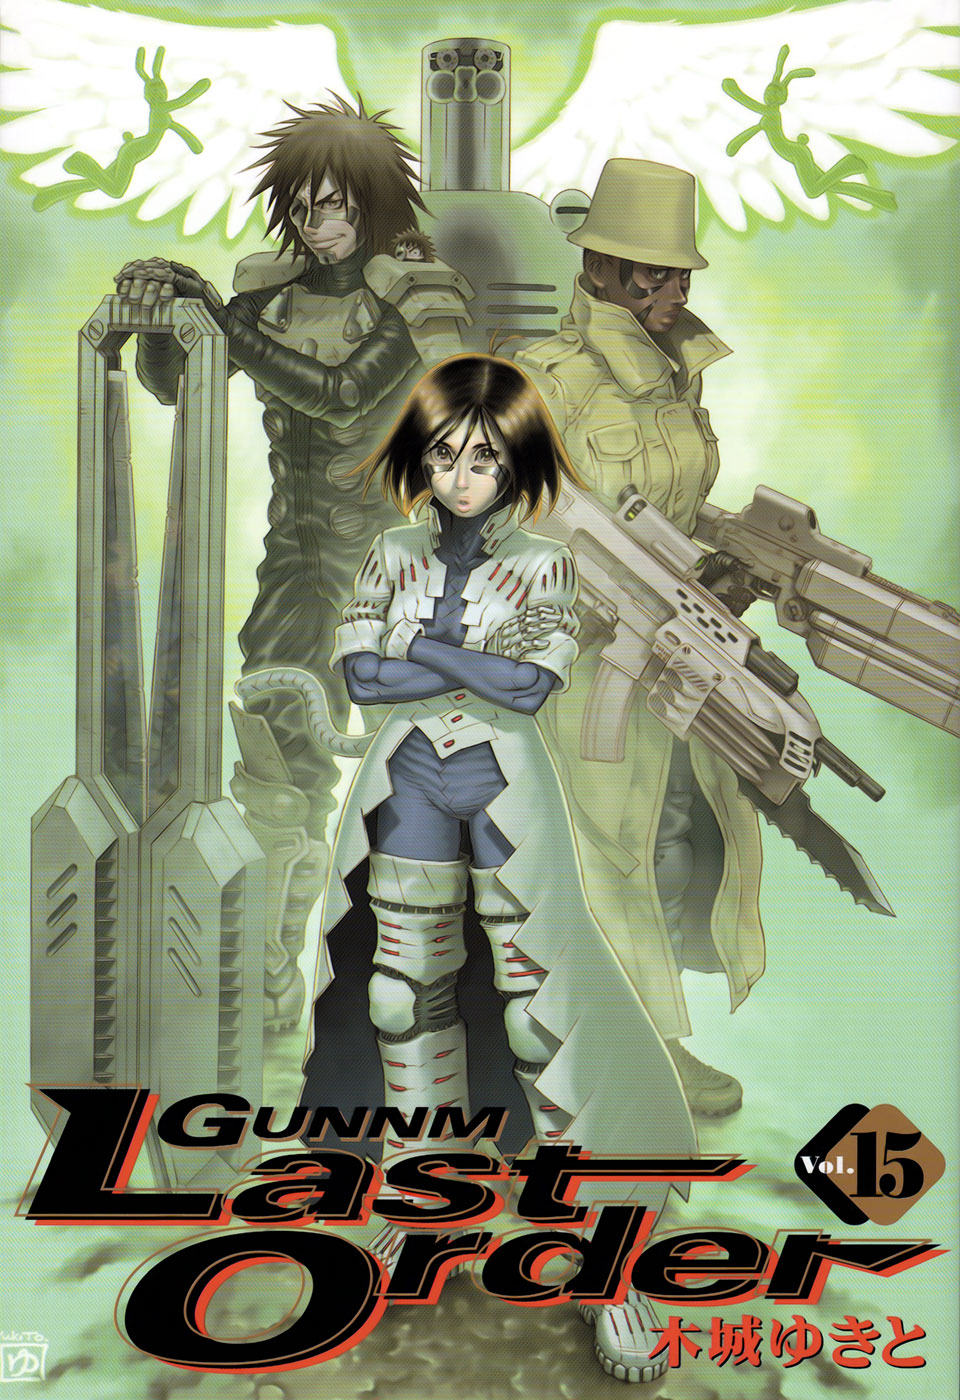 5girls androgynous animal_ears armor bangs black_eyes boots breastplate breasts brown_eyes brown_hair bunny_ears cat_tail crossed_arms cyborg dark_skin deckman_100 dual_persona elf_(gunnm) eyepatch facial_mark fingerless_gloves gally gloves green gun gunnm gunnm_last_order hair_between_eyes hair_strand hat height_difference highres jumping kishiro_yukito lips looking_at_viewer medium_breasts metal multiple_boys multiple_girls muscle one-eyed open_mouth platform_footwear reverse_trap robot science_fiction sechs serious shin_guards shoulder_pads smirk spiked_hair standing tail trench_coat weapon wings yellow_eyes zazie zwolf